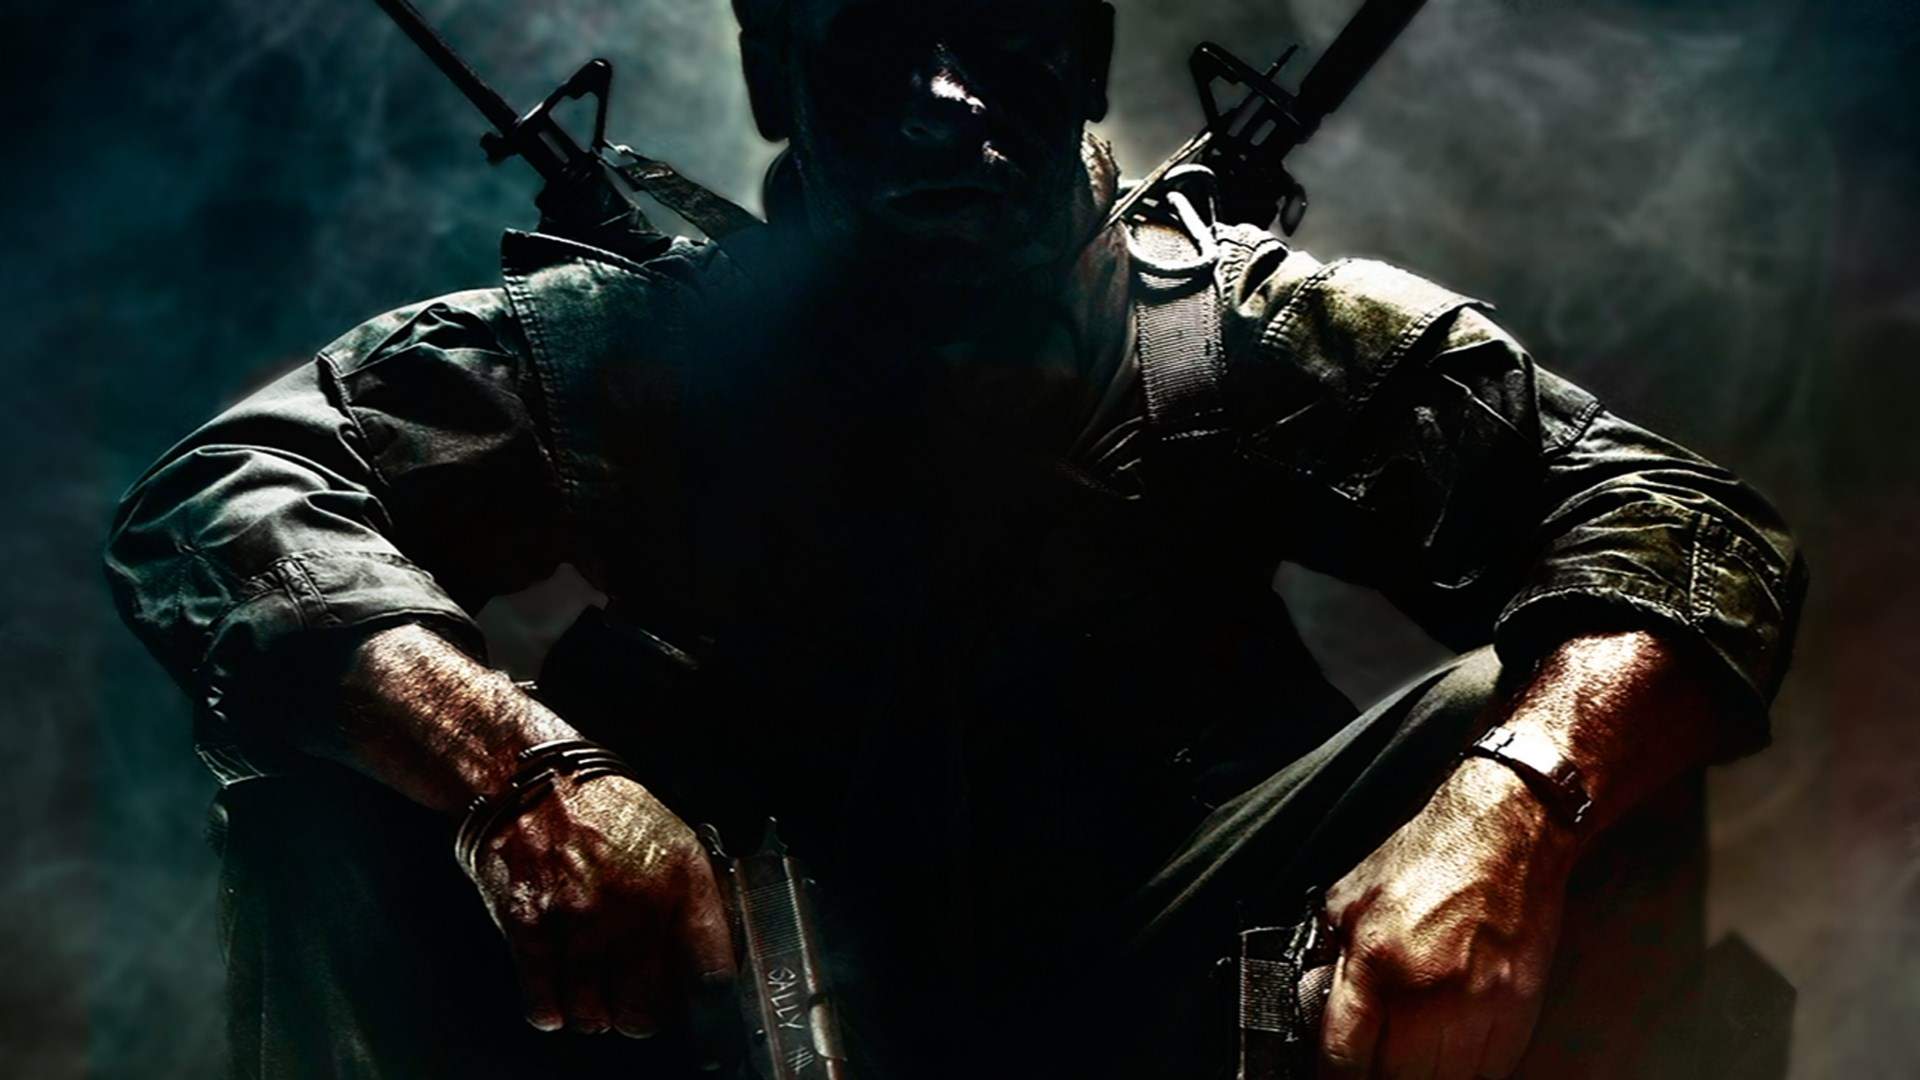 Report: 2020's Call of Duty is Called Call of Duty: Black Ops Cold War